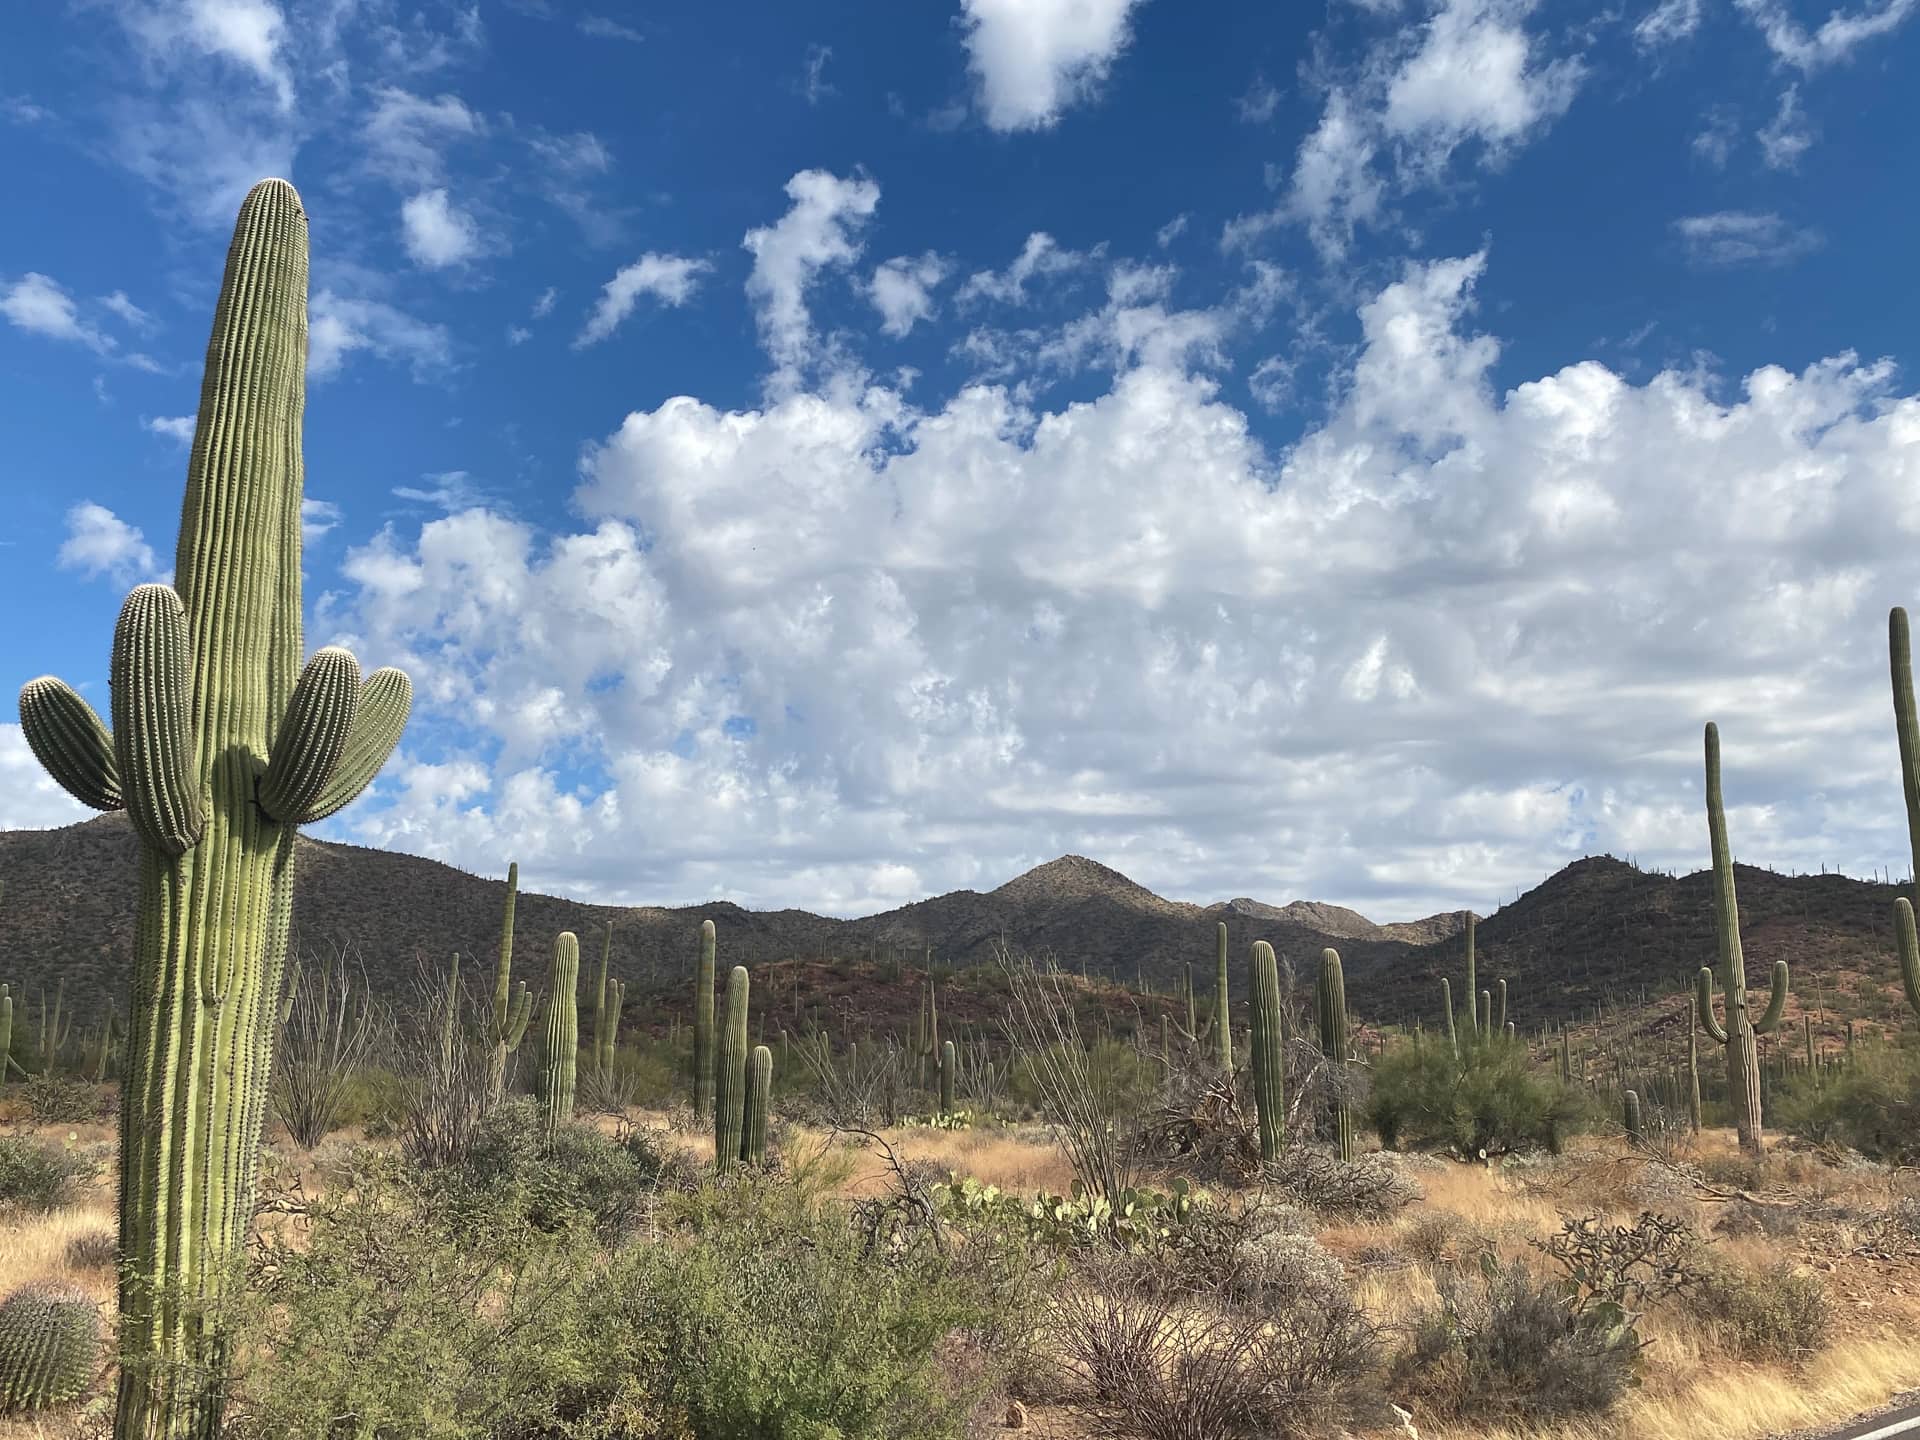 Where to Camp When Visiting Saguaro National Park by RV